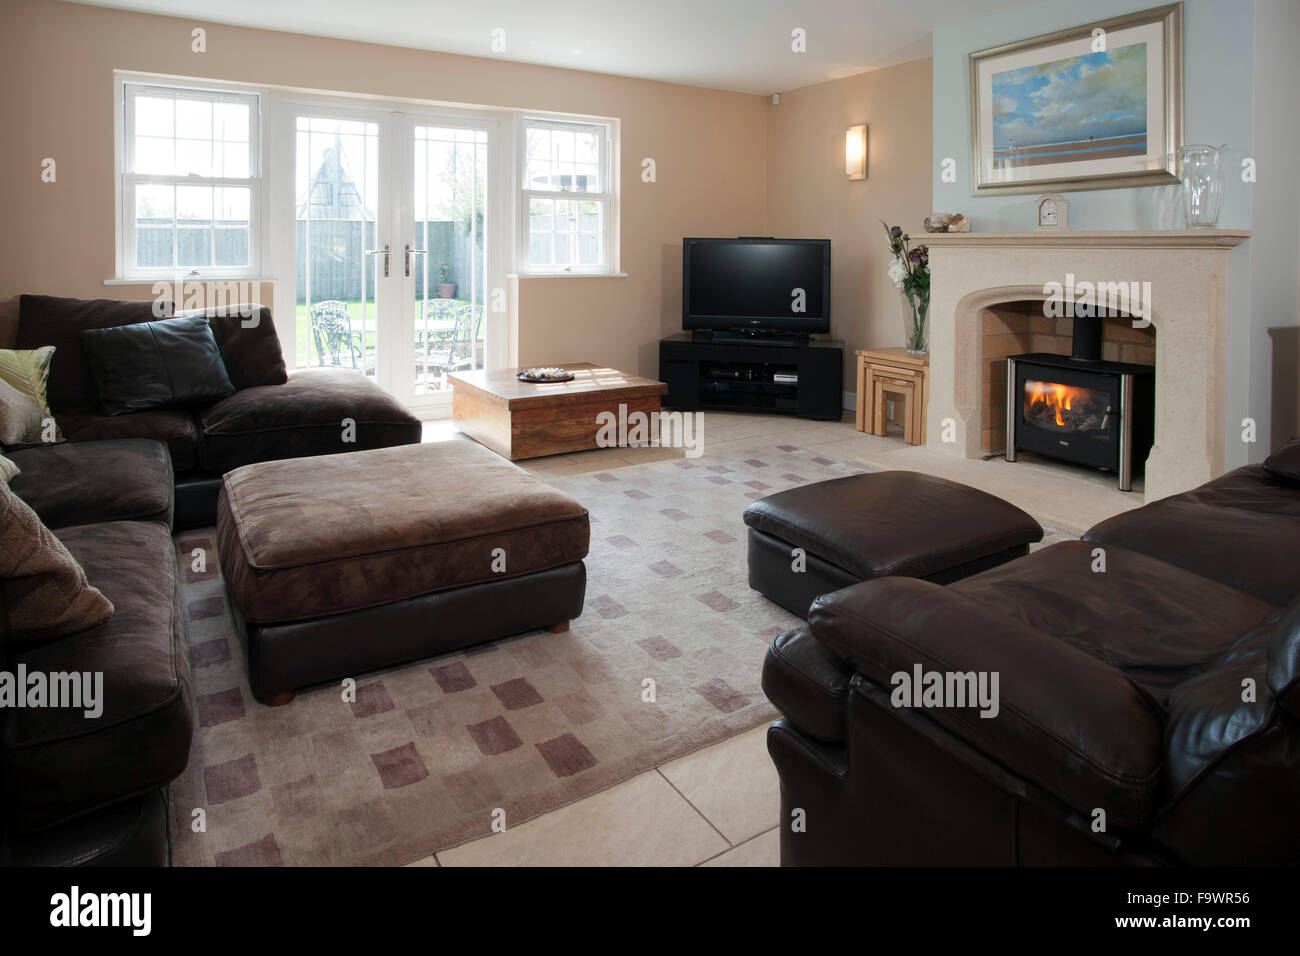 Contemporary sitting room, no curtains. Stock Photo